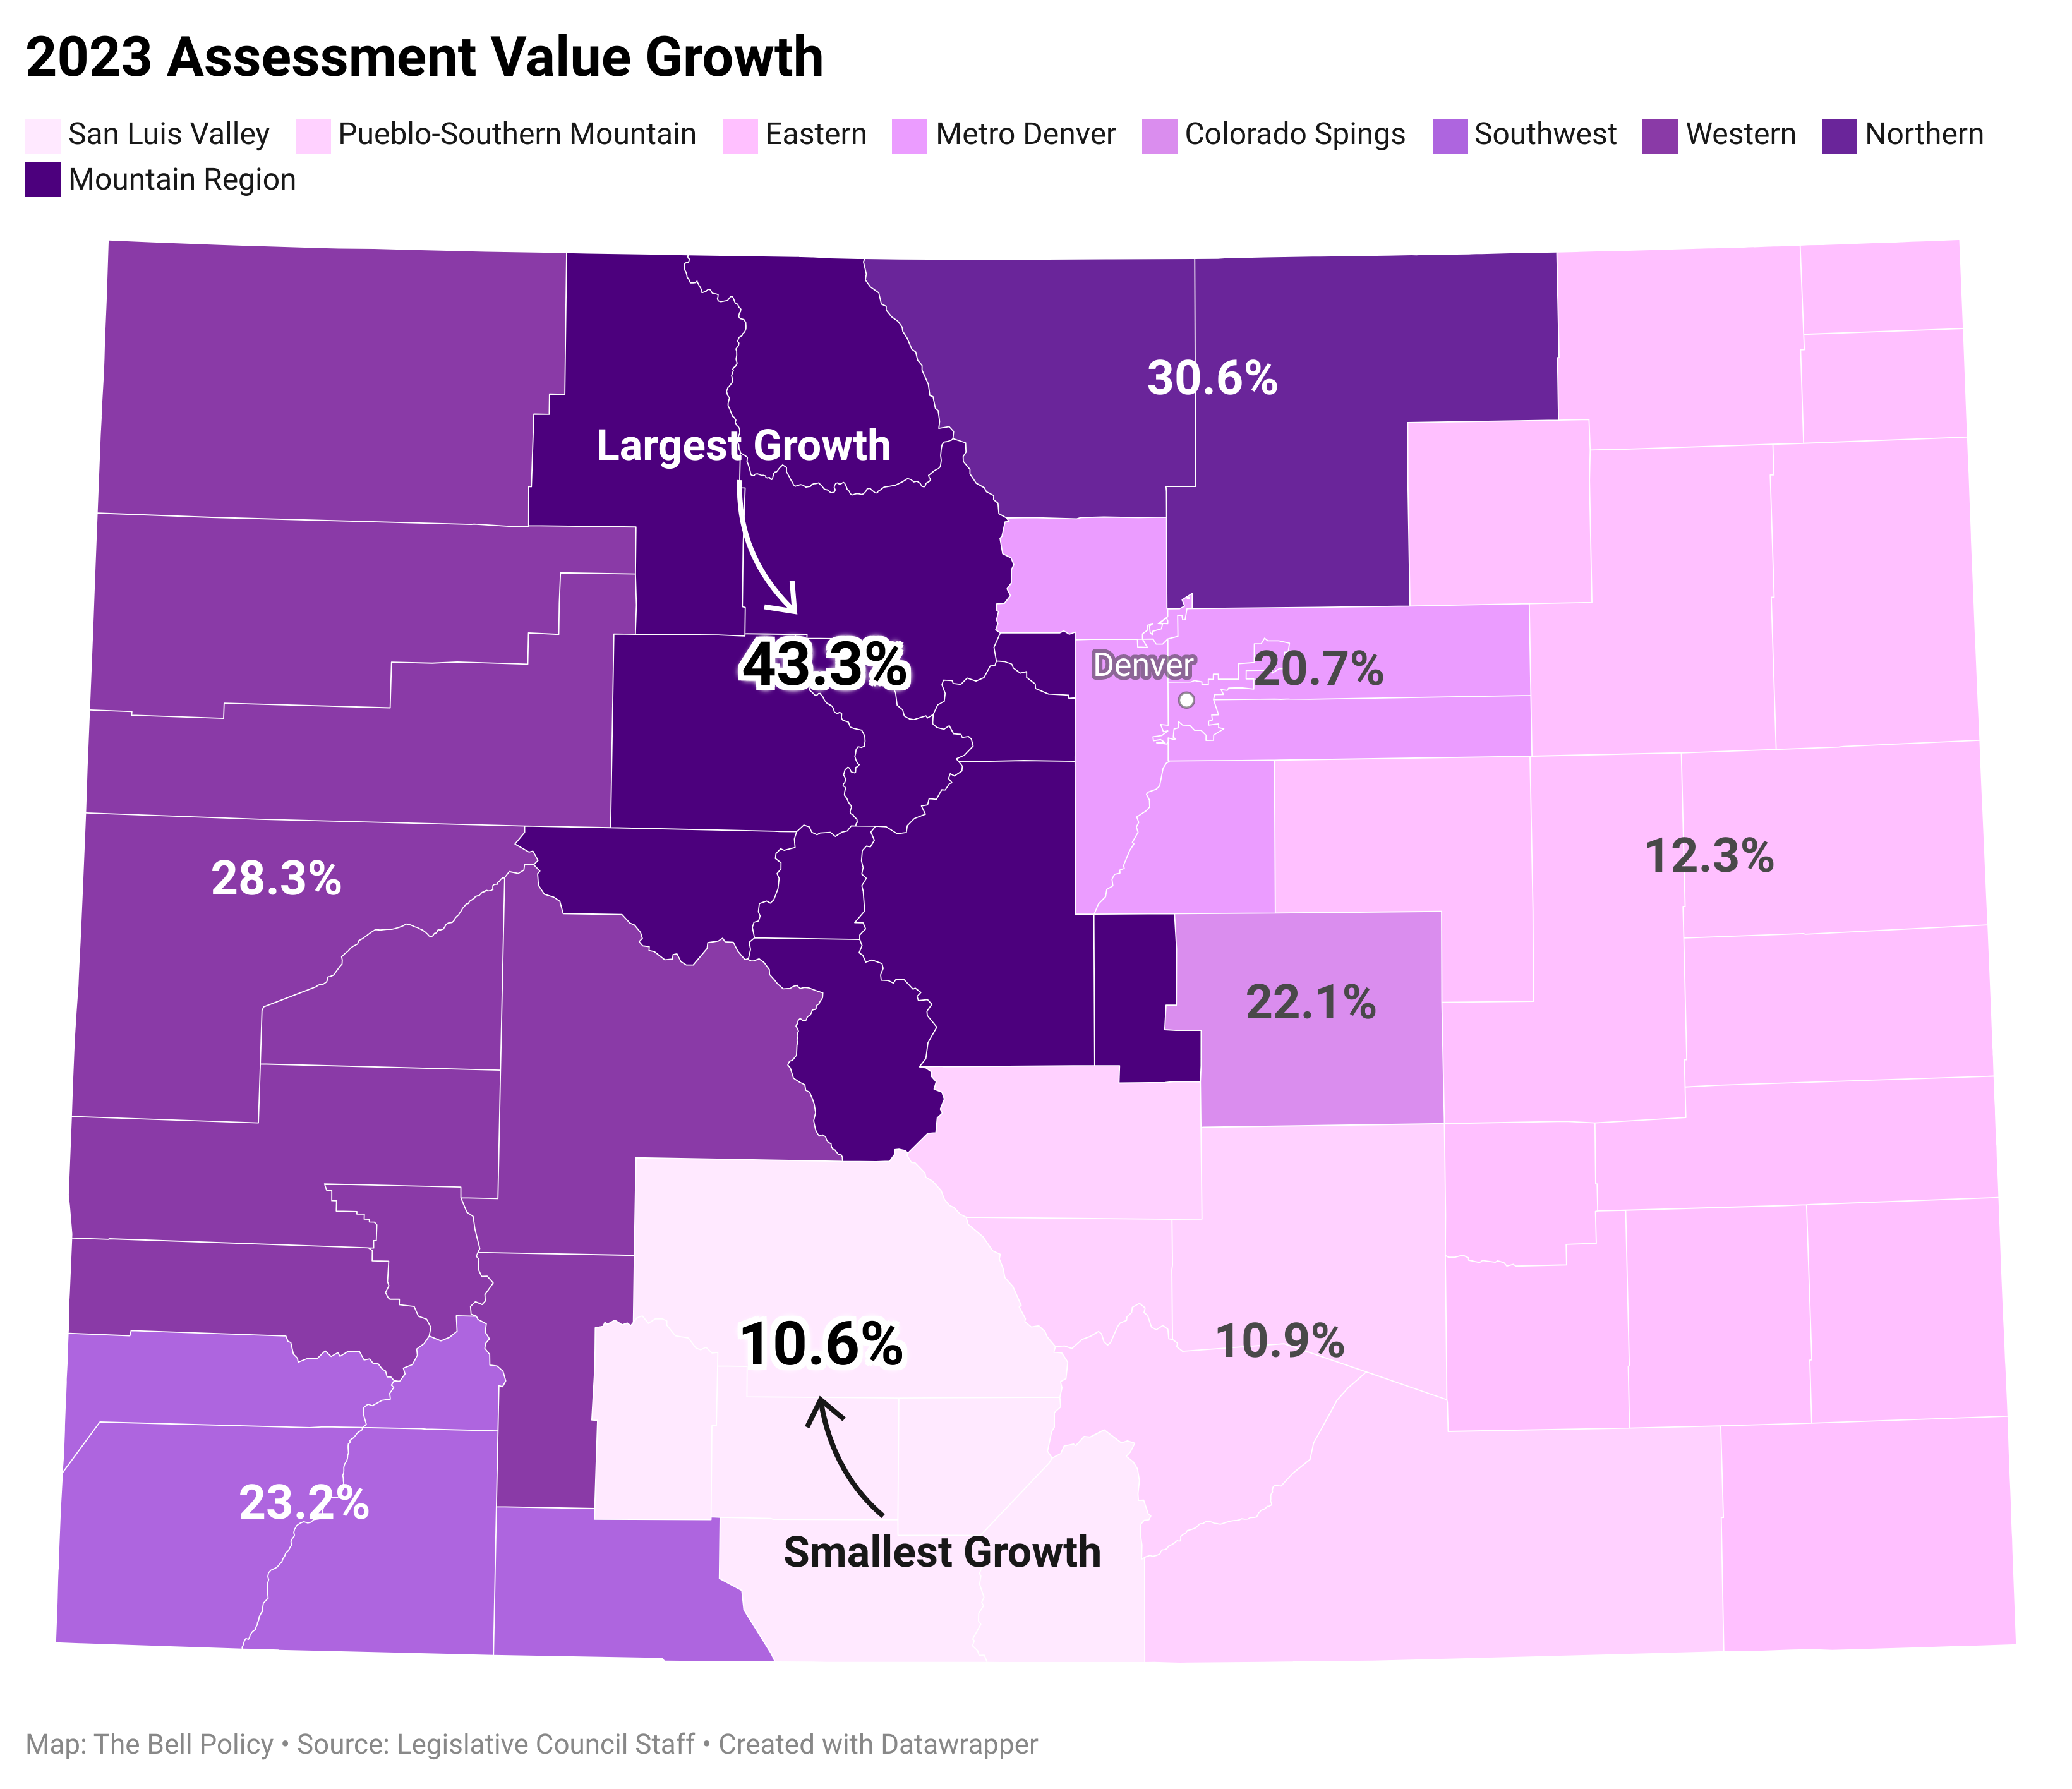 A color-coded map showing regional population growth in Colorado, with the largest increase of 43.3% in the north-central region due to differing property tax changes.